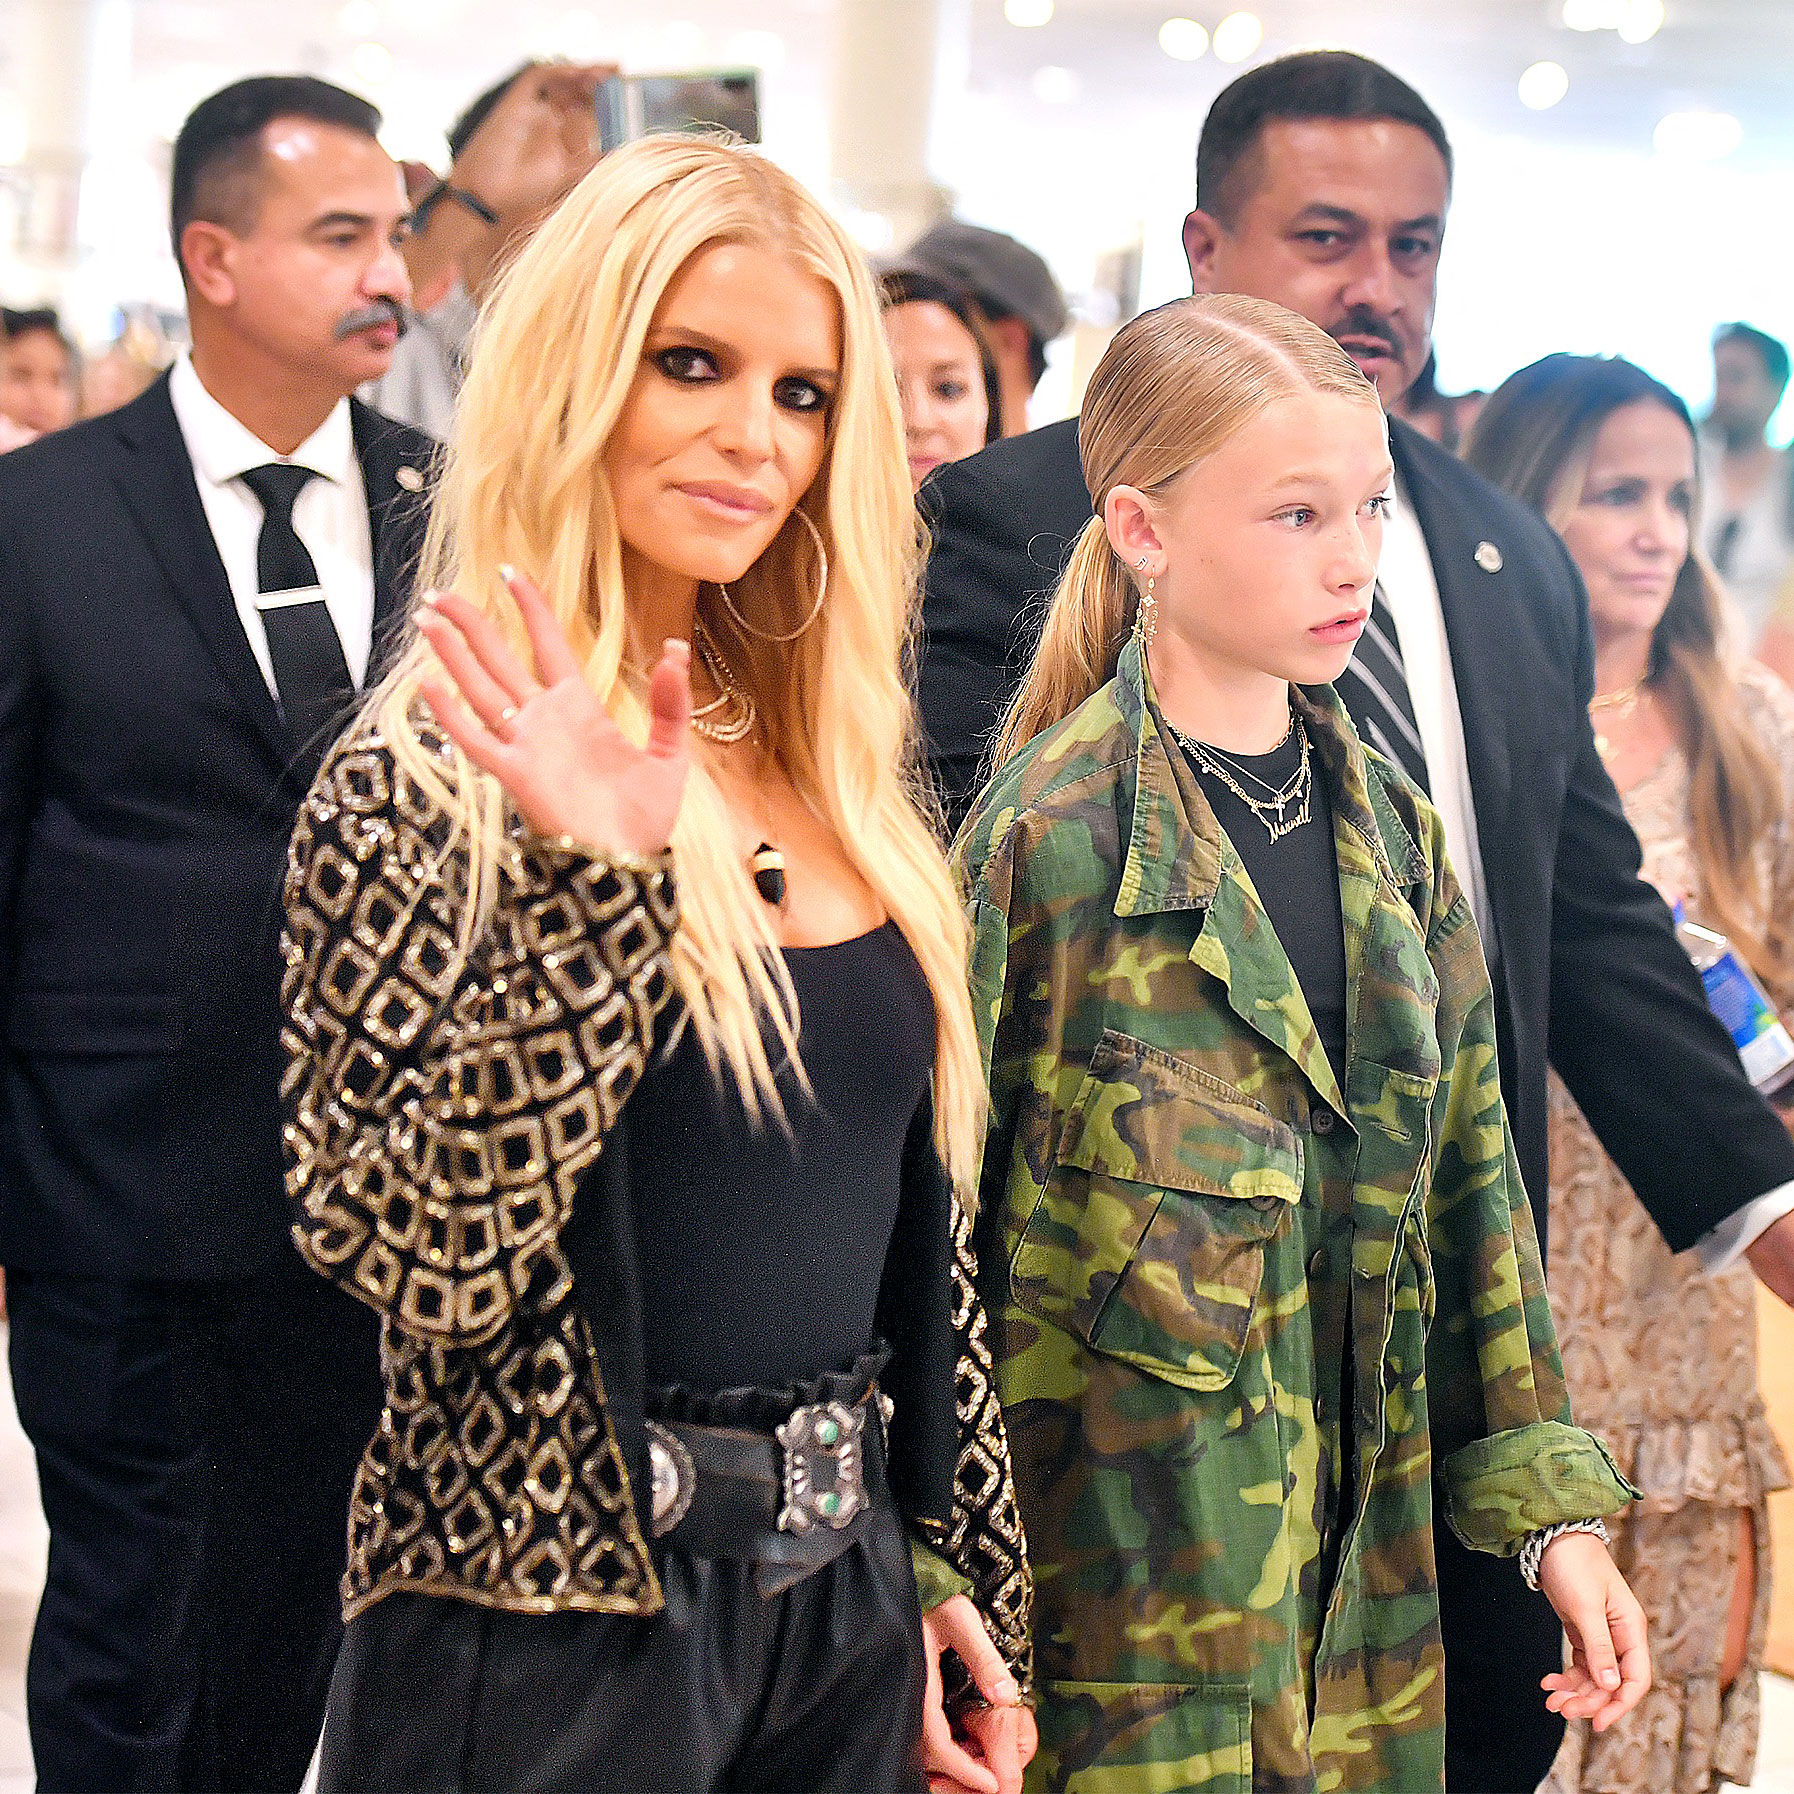 Jessica Simpson's 3 Kids Support Her at Fashion Launch: Photos